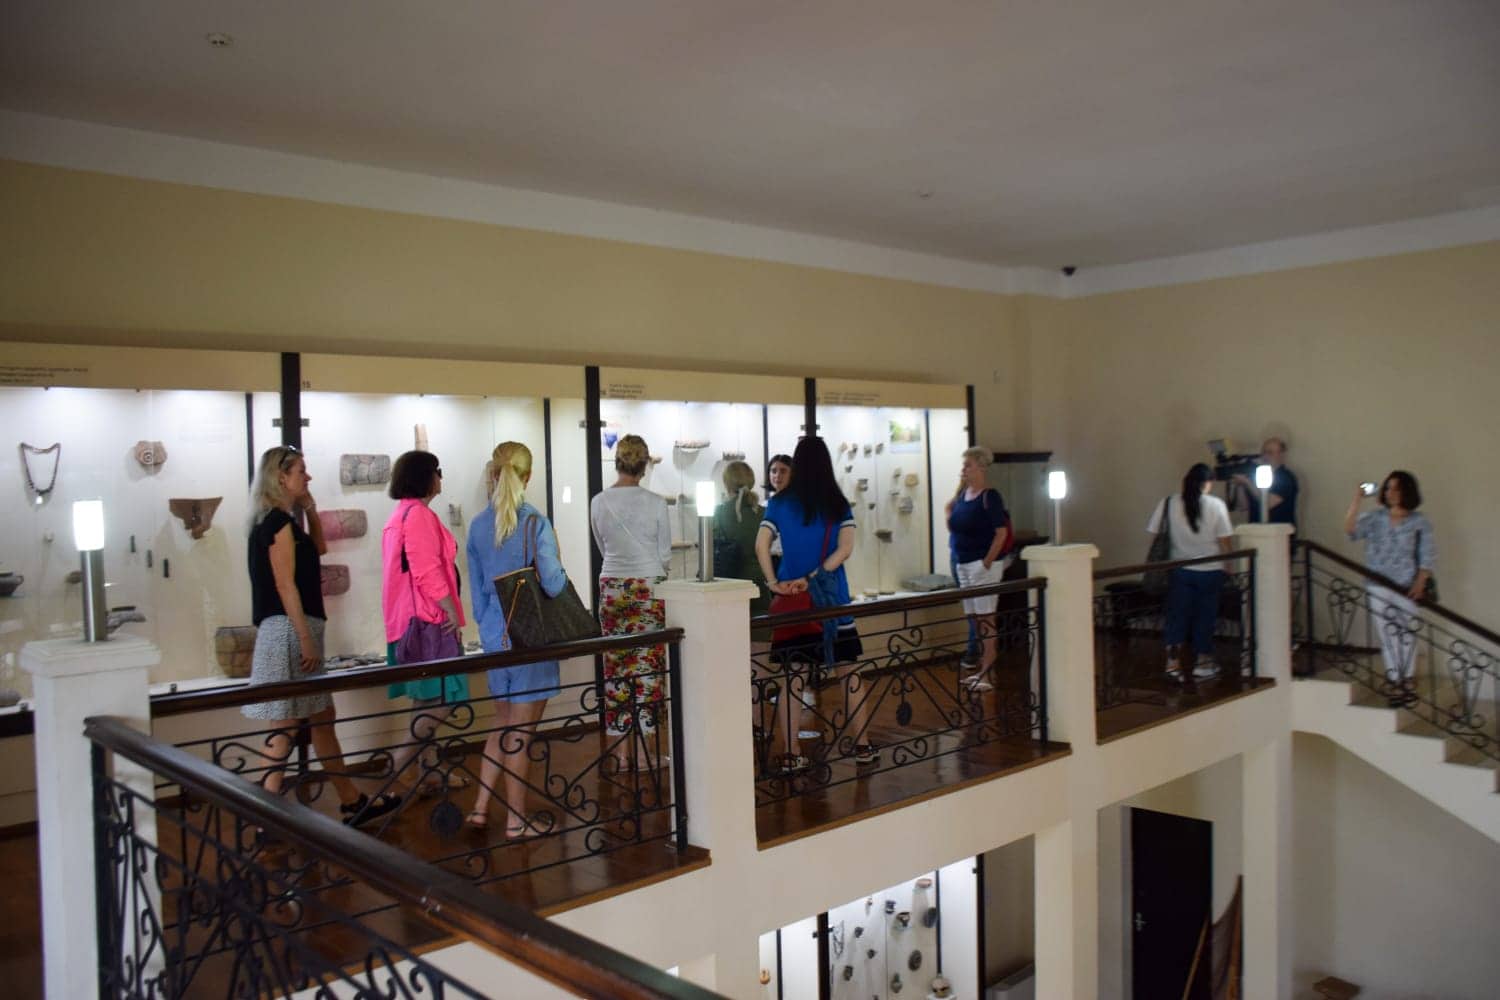 tourism companies from Lithuania and Estonia in Batumi's Archaeological museum.